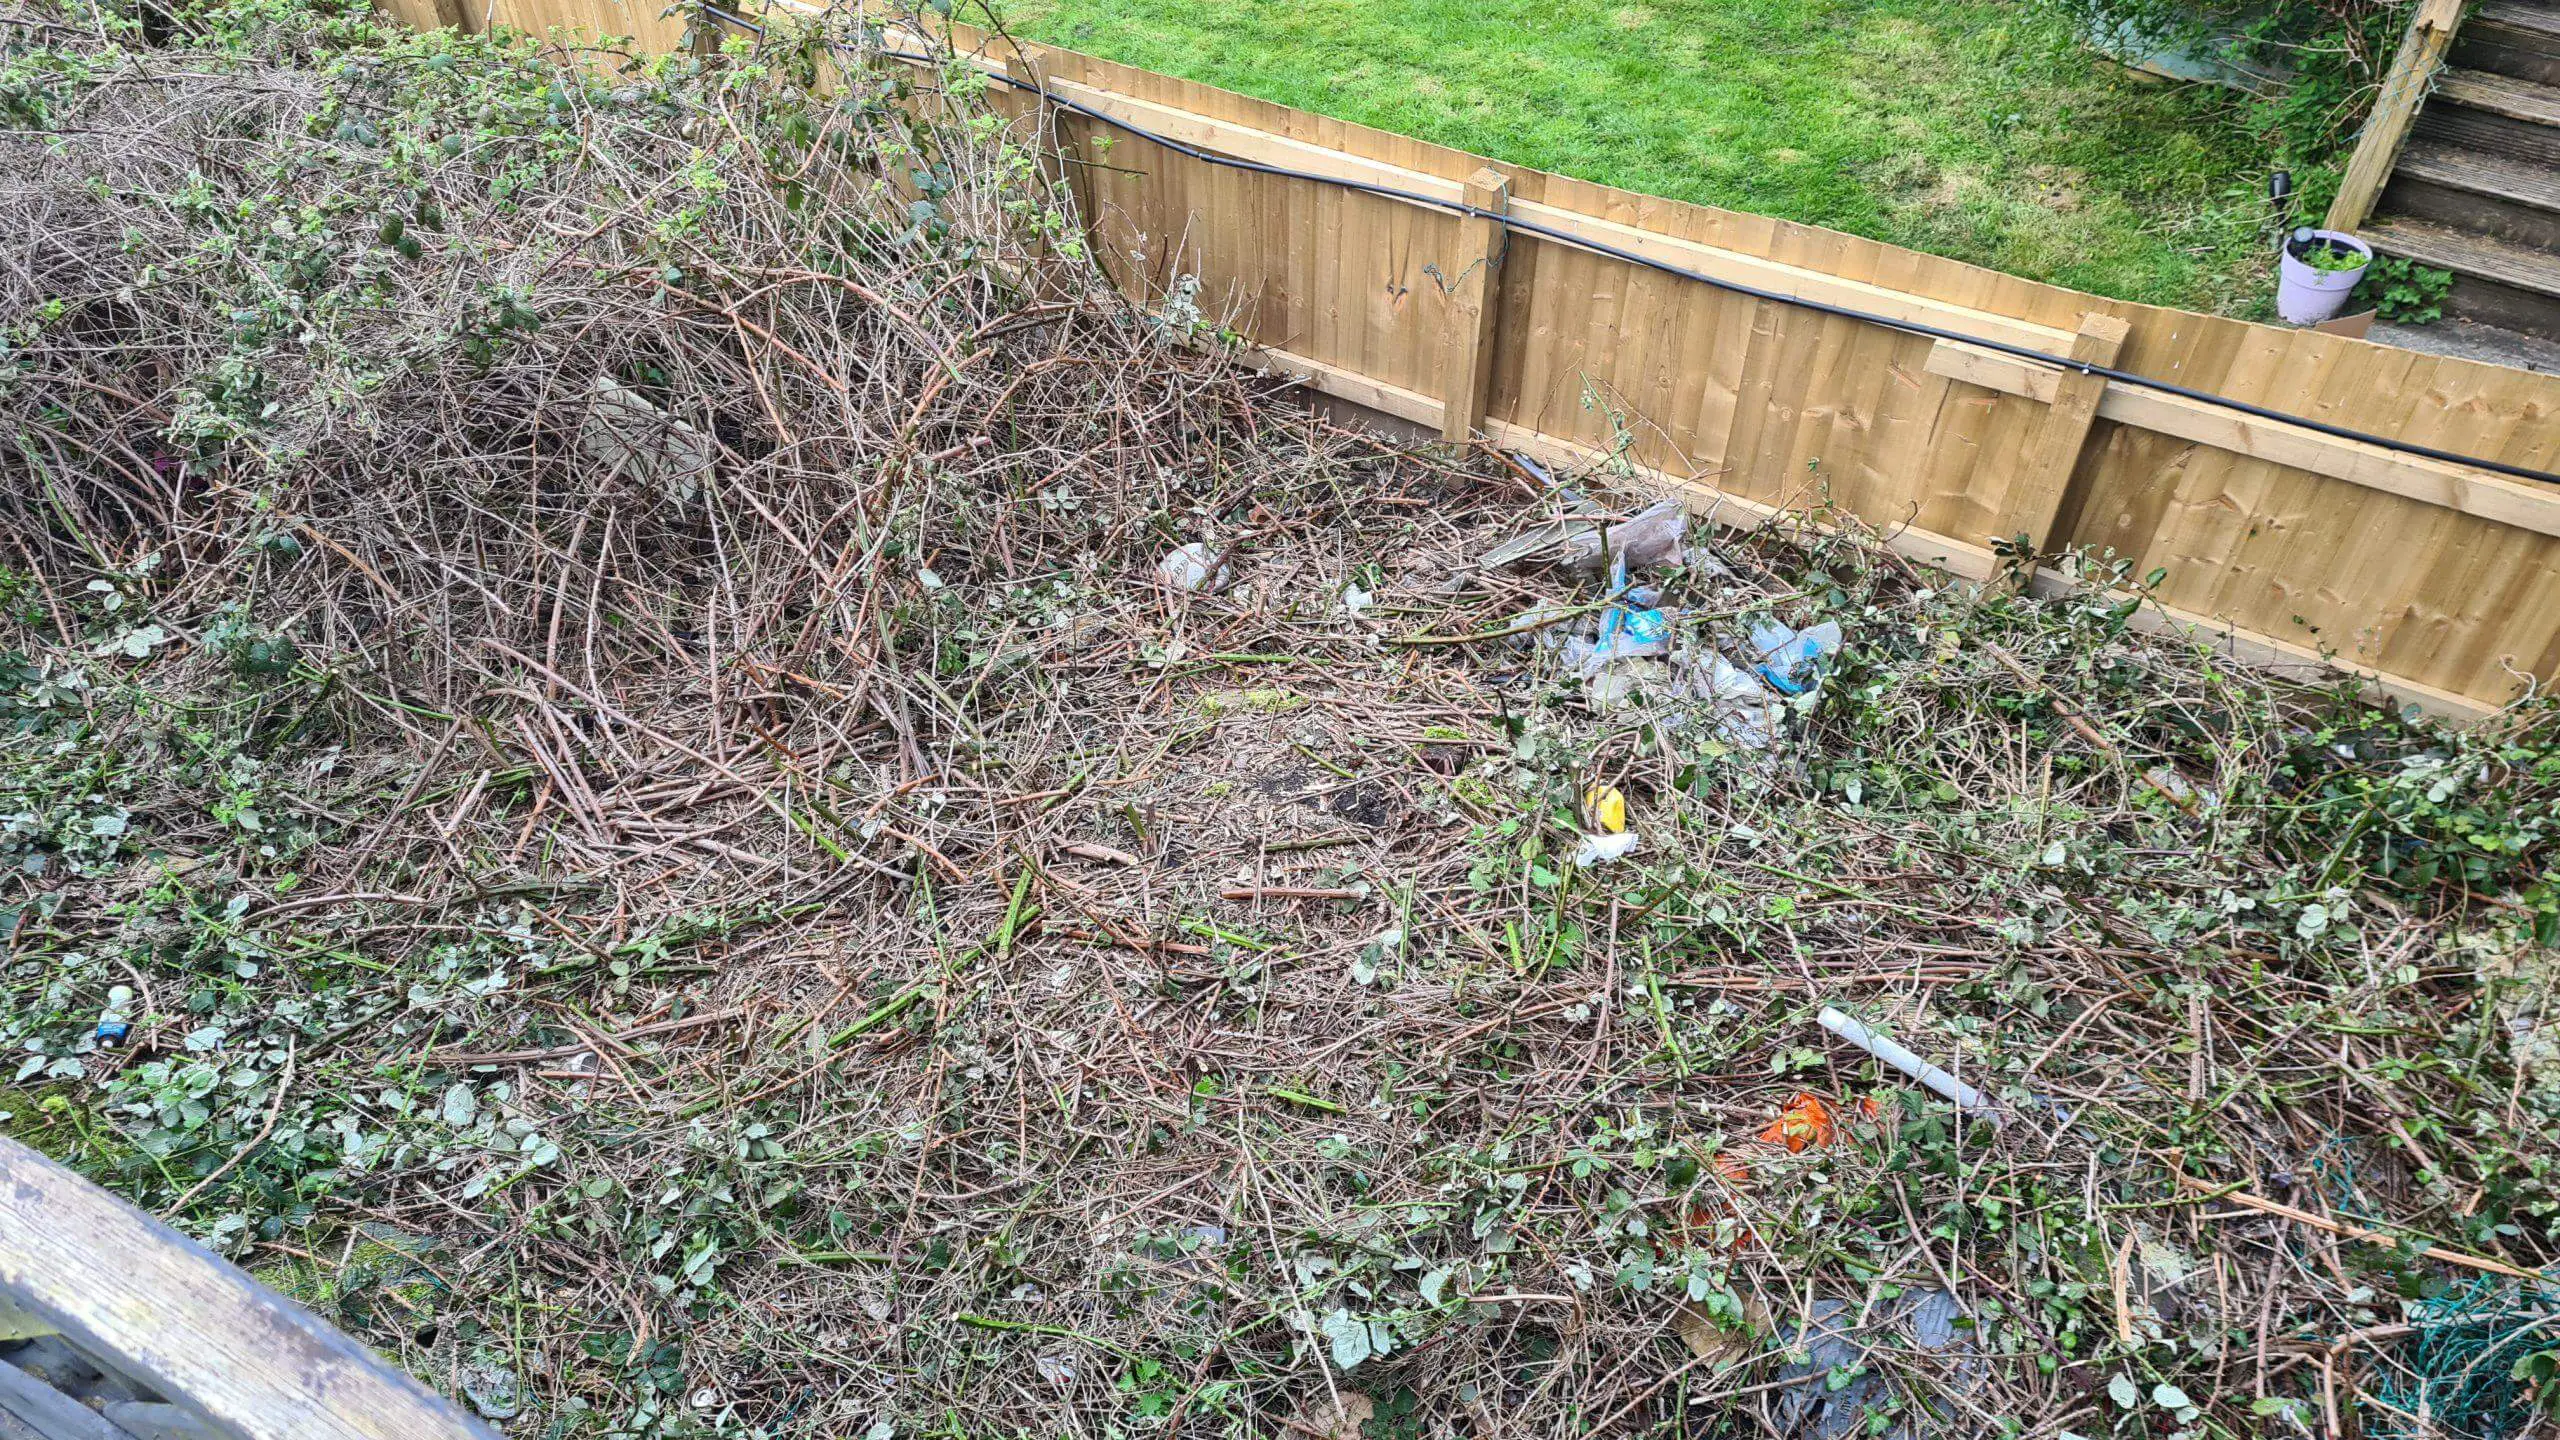 Nice patch of garden reclaimed from chopping down brambles with a hedge cutter